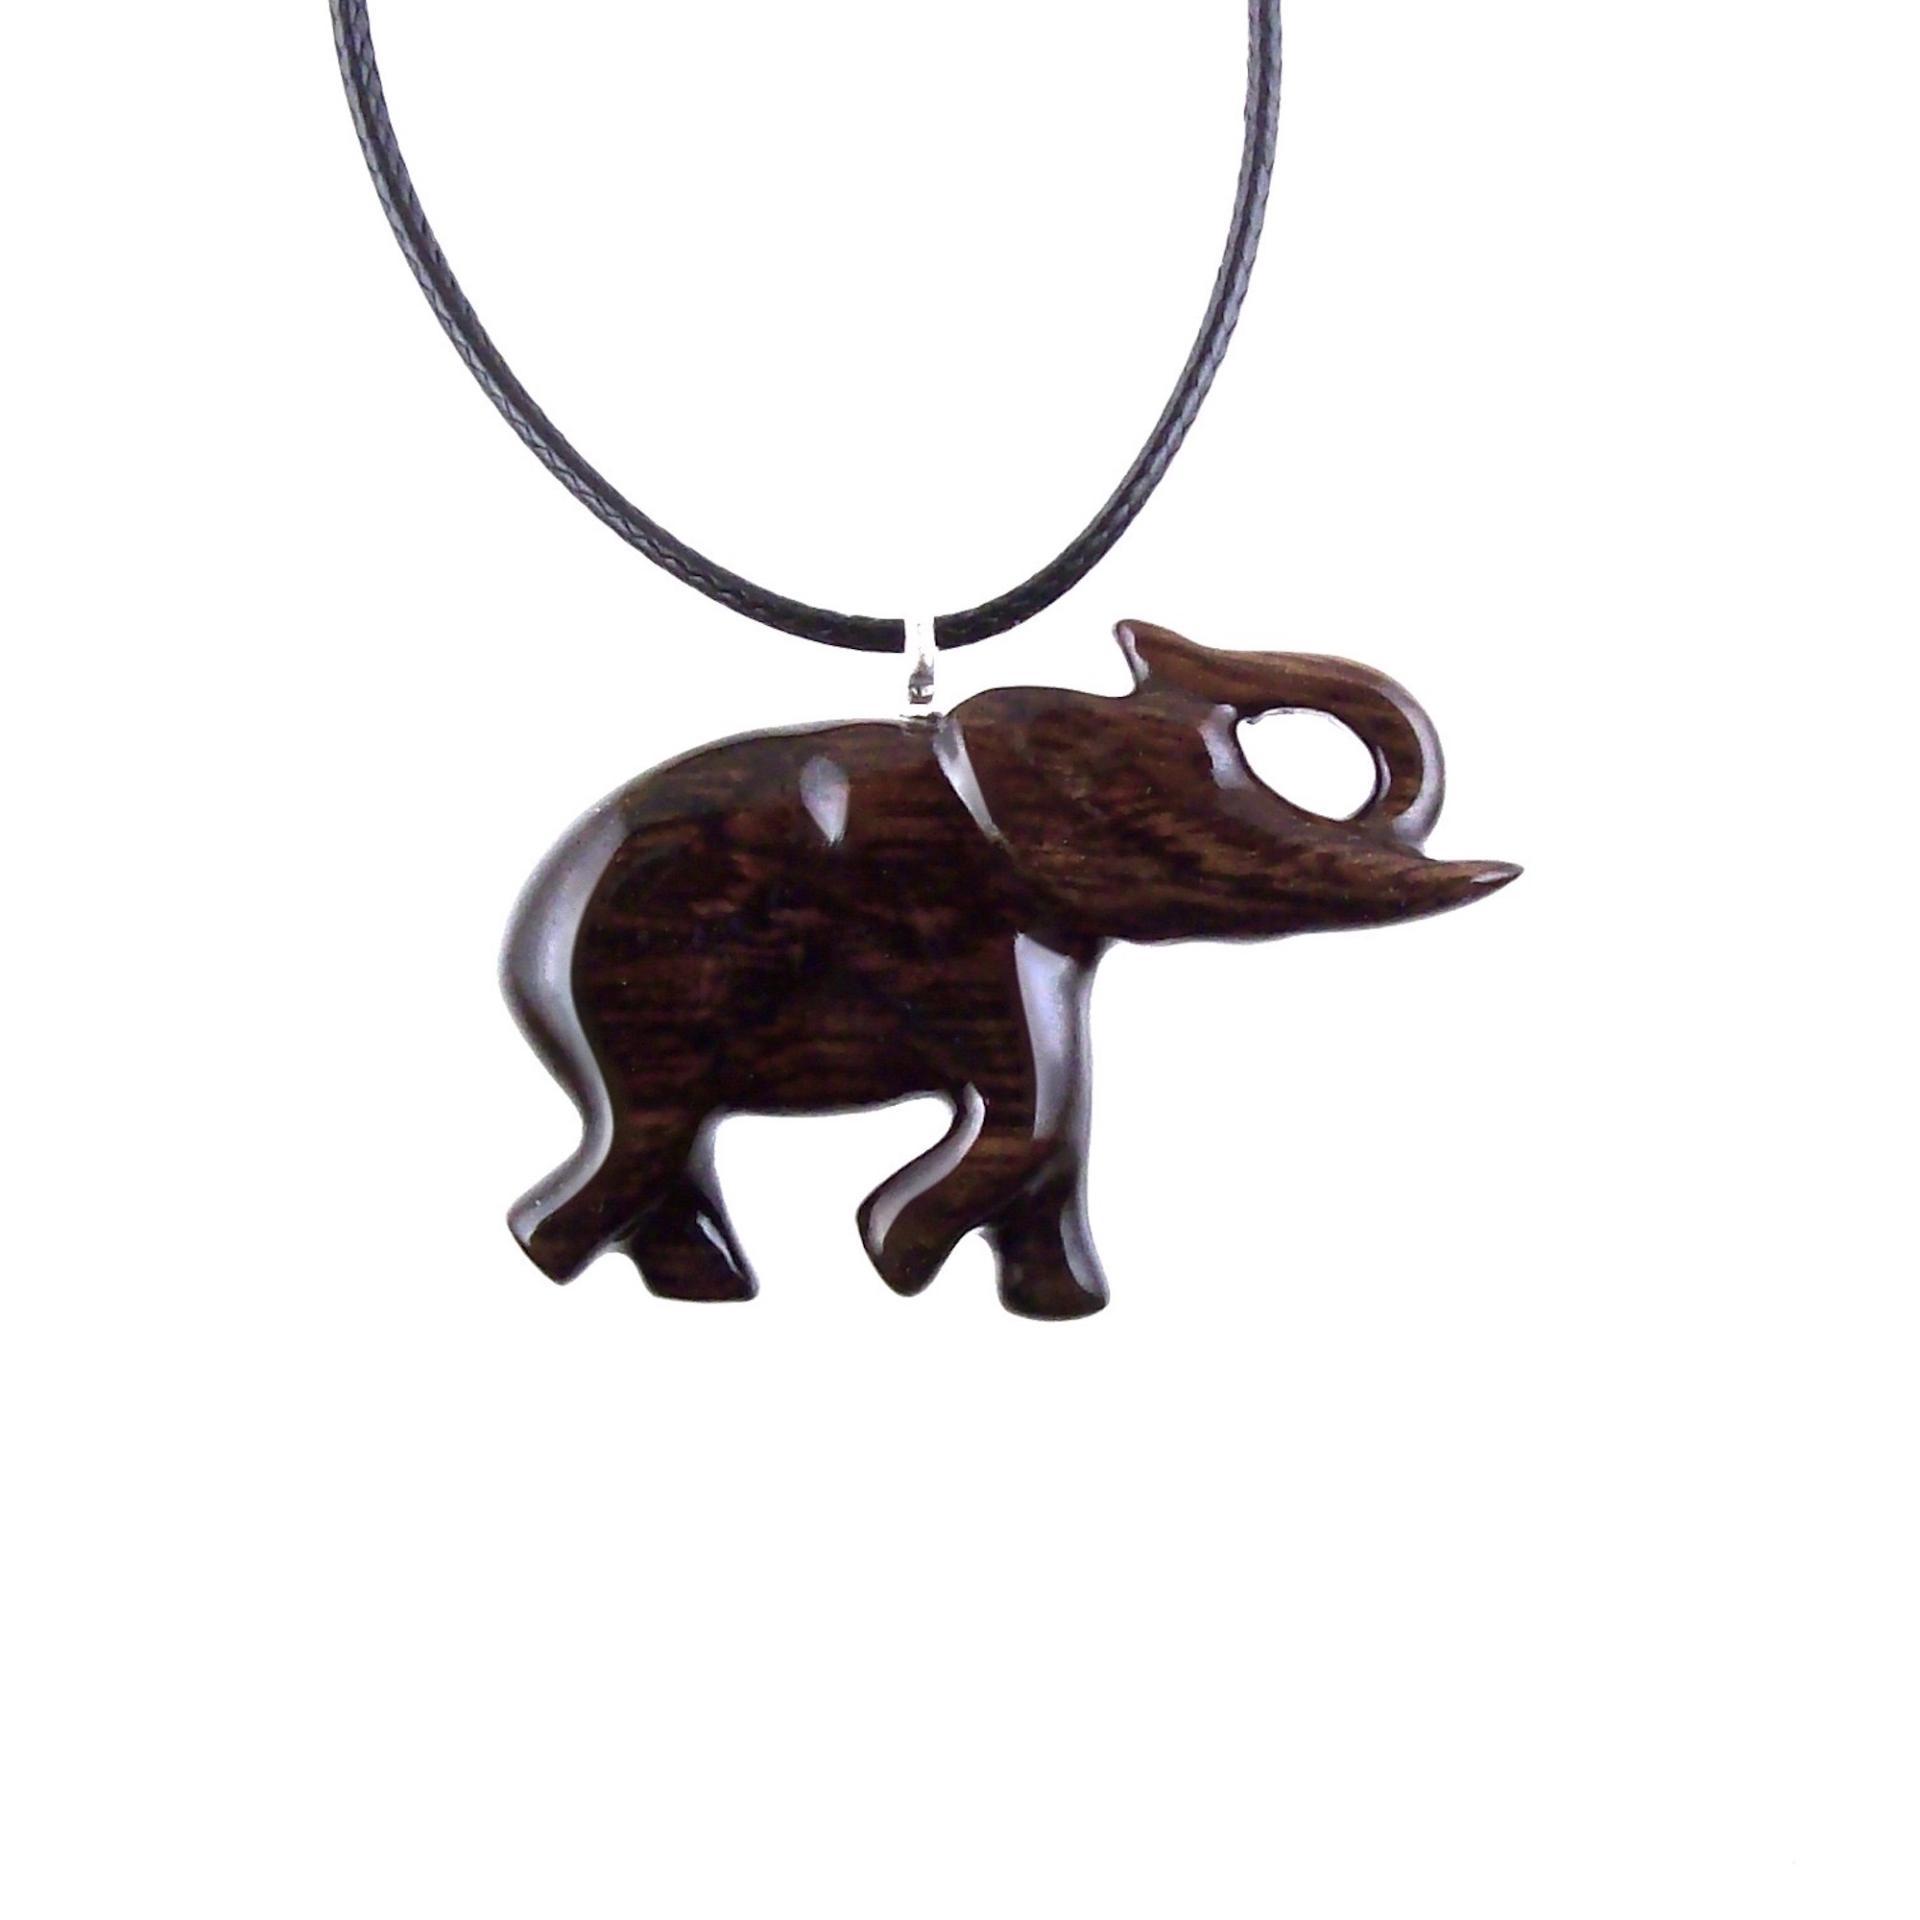 Wooden Elephant Pendant, Hand Carved Lucky Trunk Up Elephant Necklace for Men or Women, Spiritual Animal Wood Jewelry, Gift for Him Her